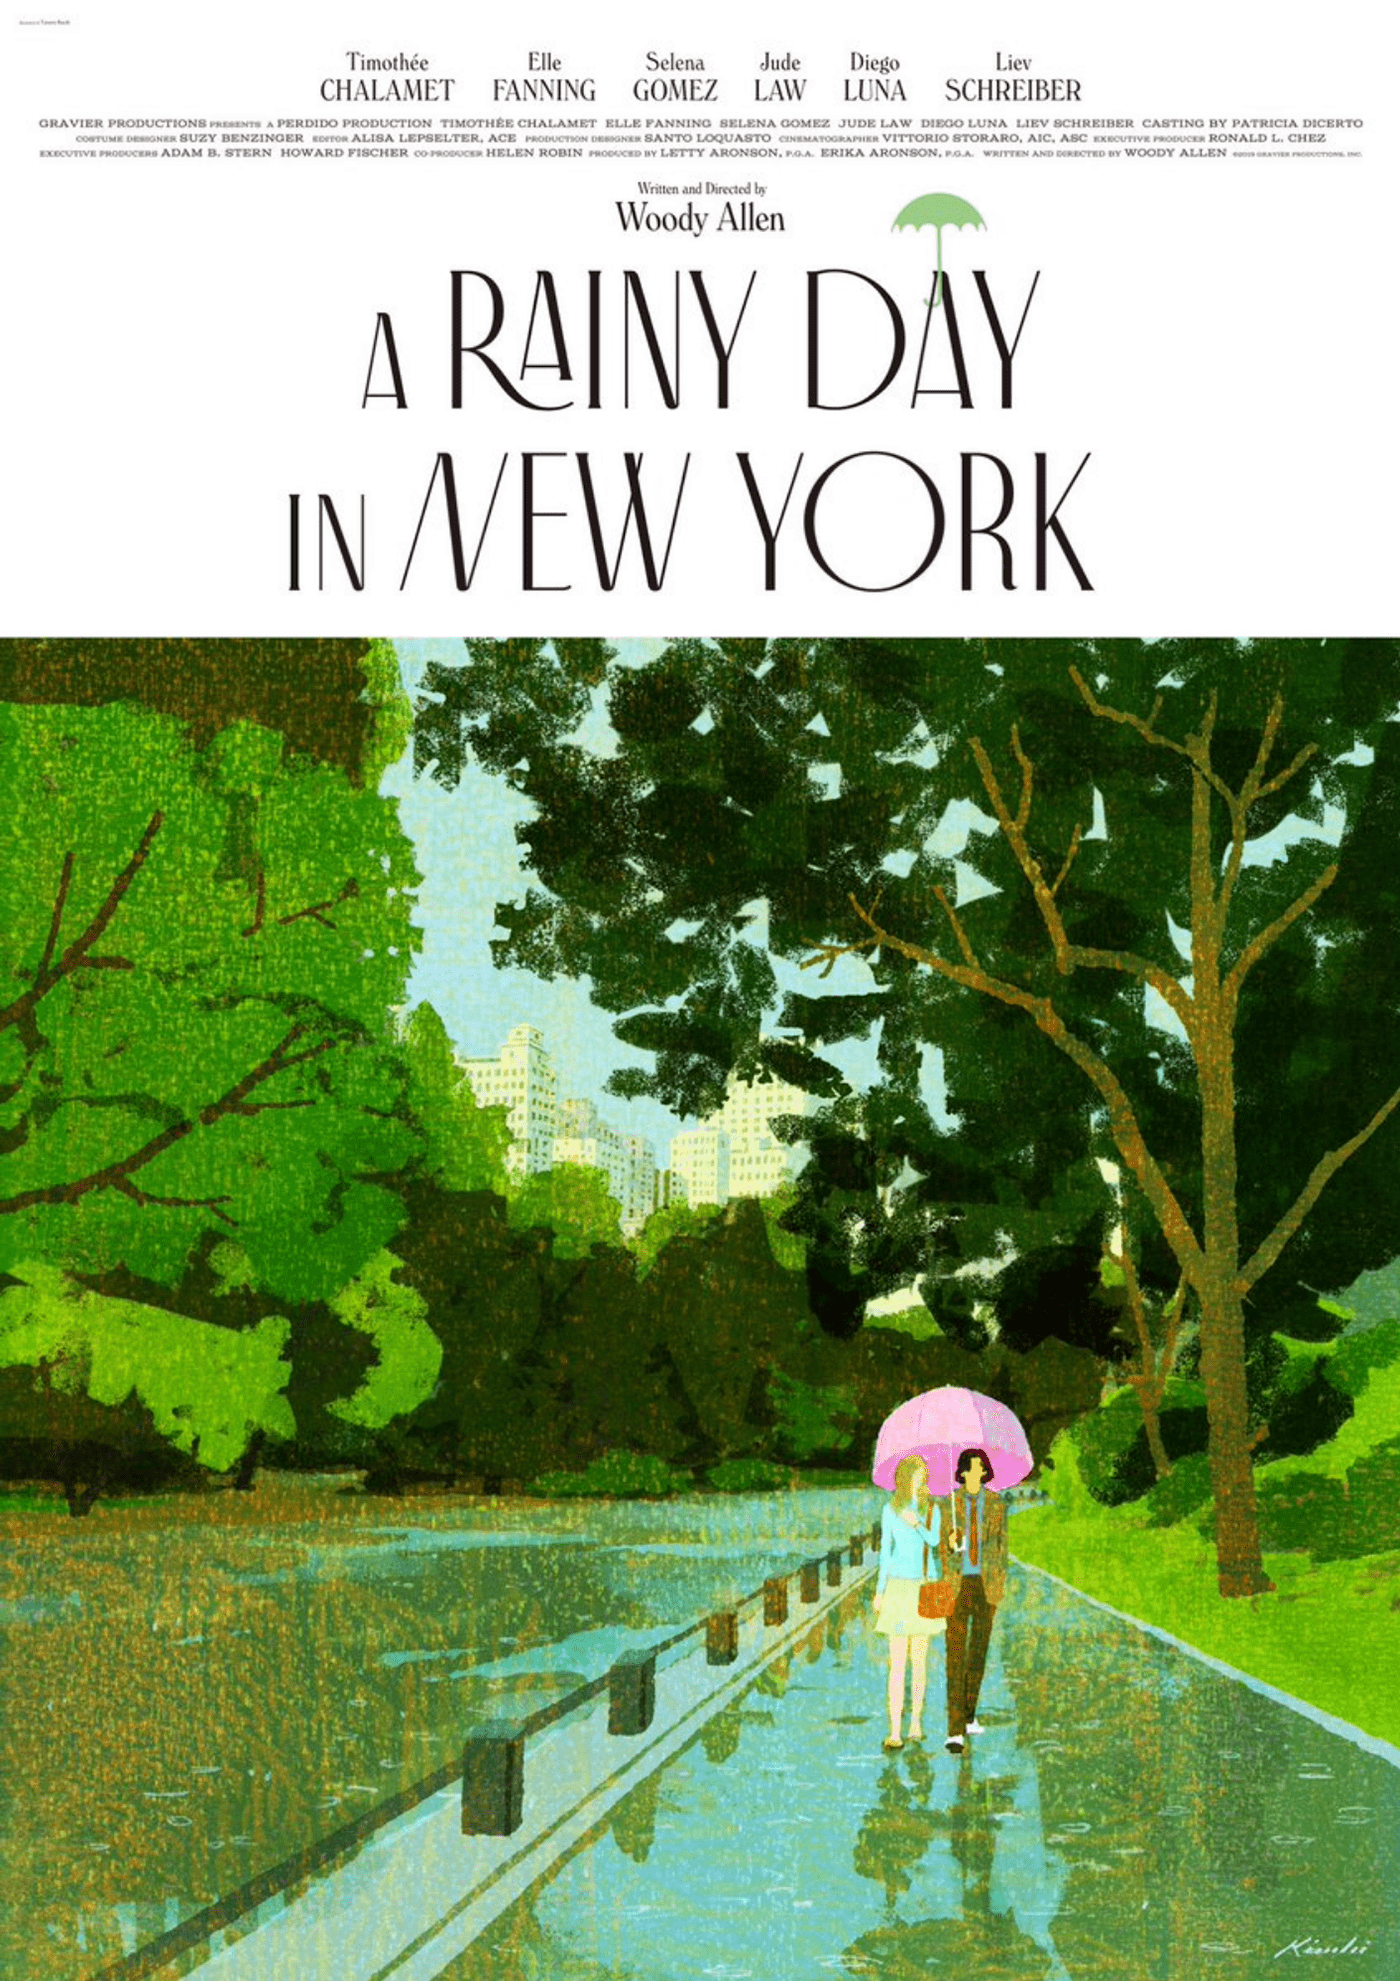 A Rainy Day in New York on Behance